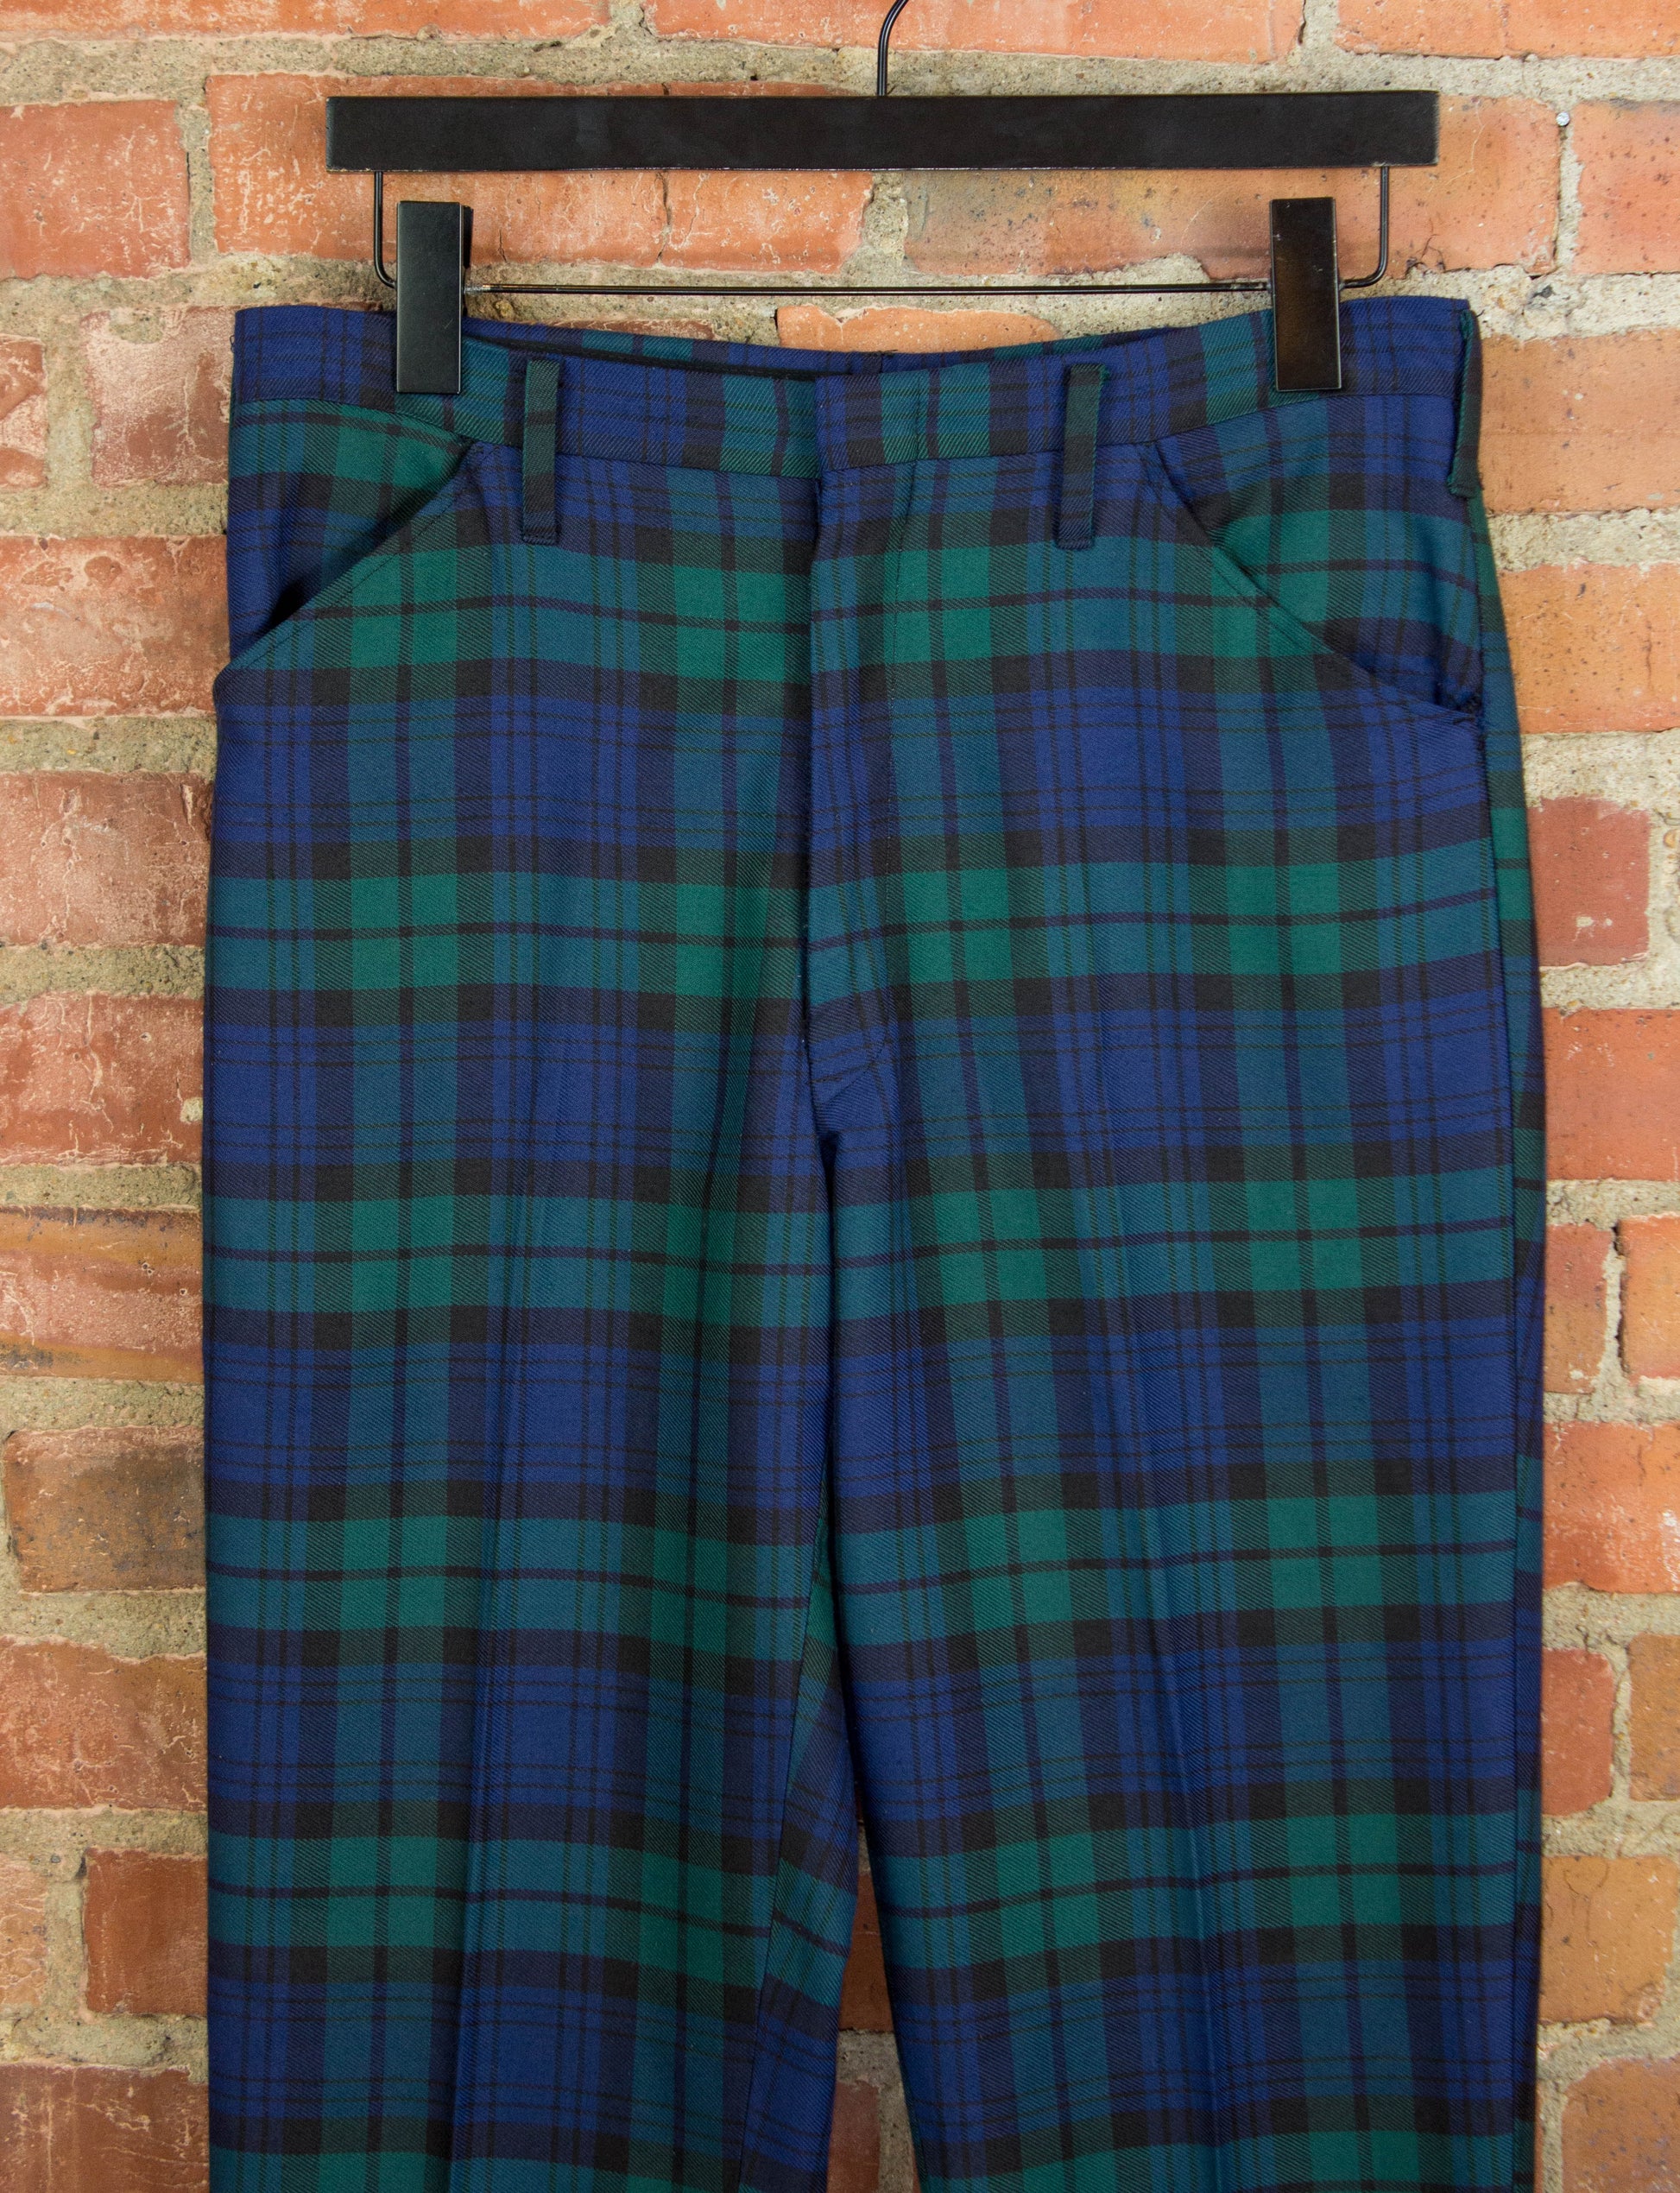 Vintage 70s Galey and Lord Green and Blue Plaid Slacks Size 30x32